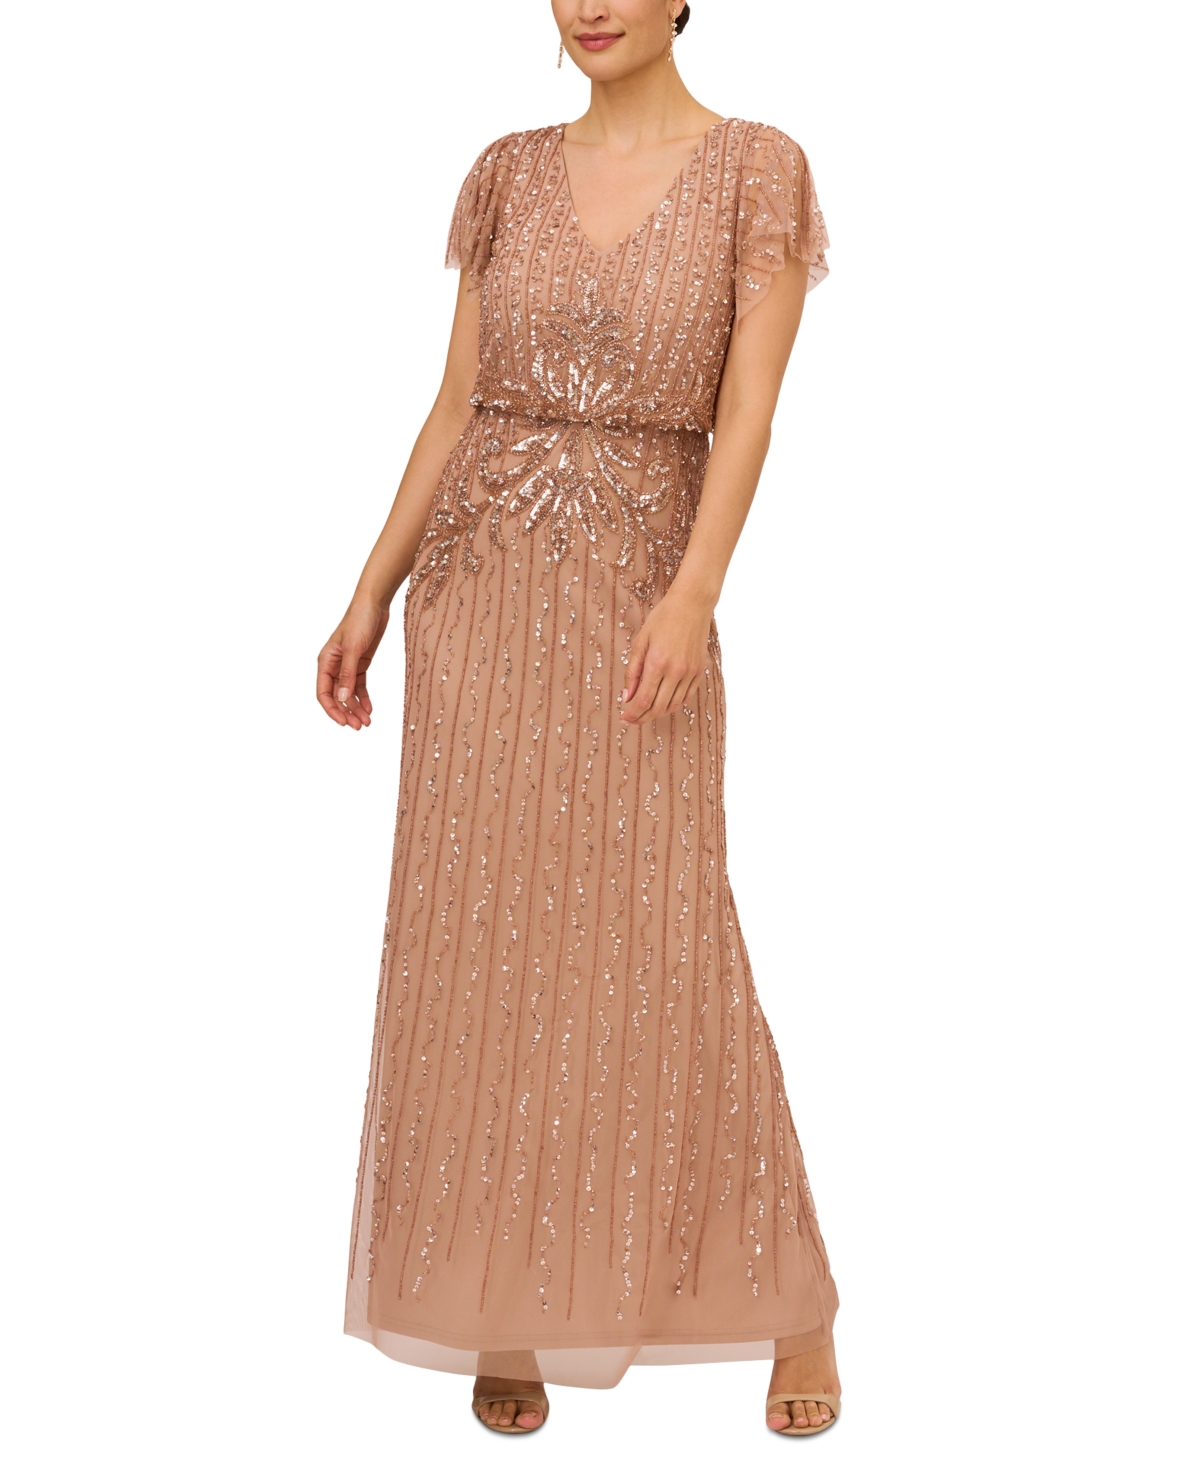 1920s Style Dresses, 1920s Dress Fashions You Will Love Adrianna Papell Womens Beaded Flutter-Sleeve Gown - Rose Gold $249.00 AT vintagedancer.com